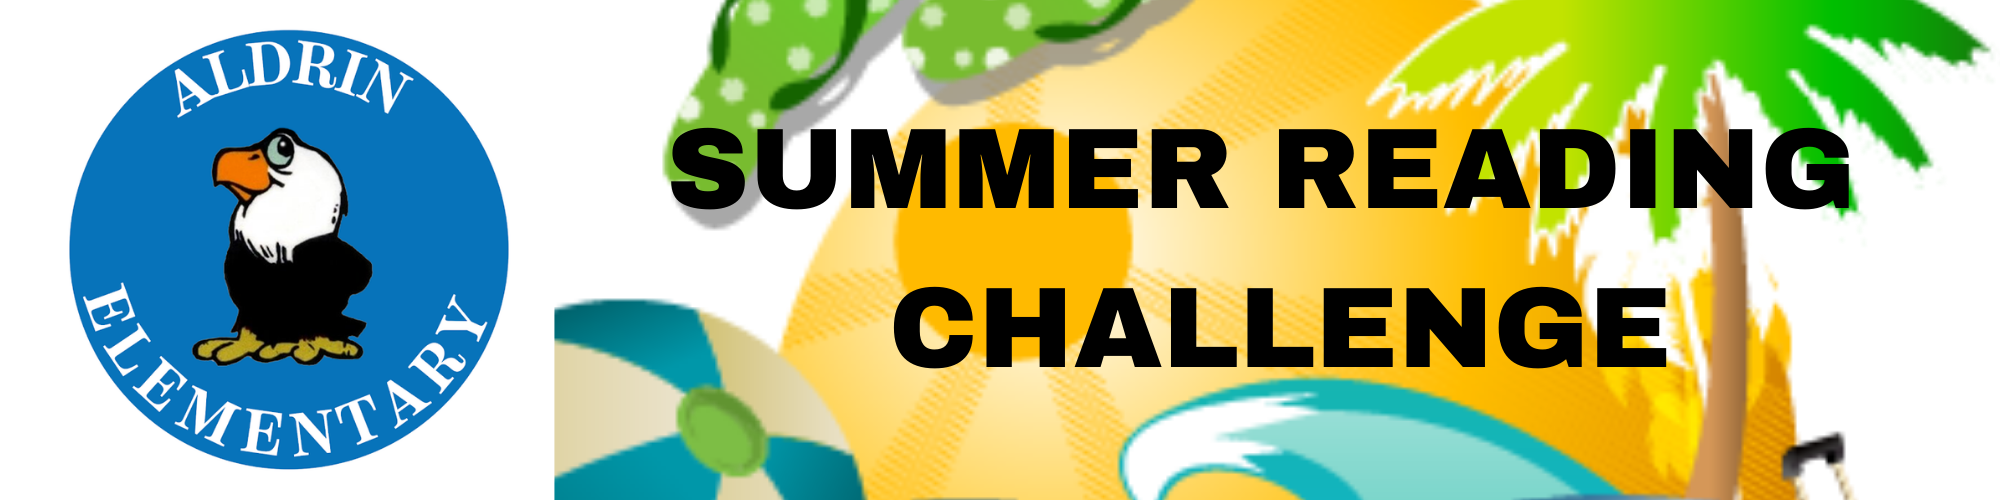 SUMMER READING CHALLENGE WITH EAGLE ON LEFT AND CLIPART OF BEACH OCEAN WAVES ON RIGHT